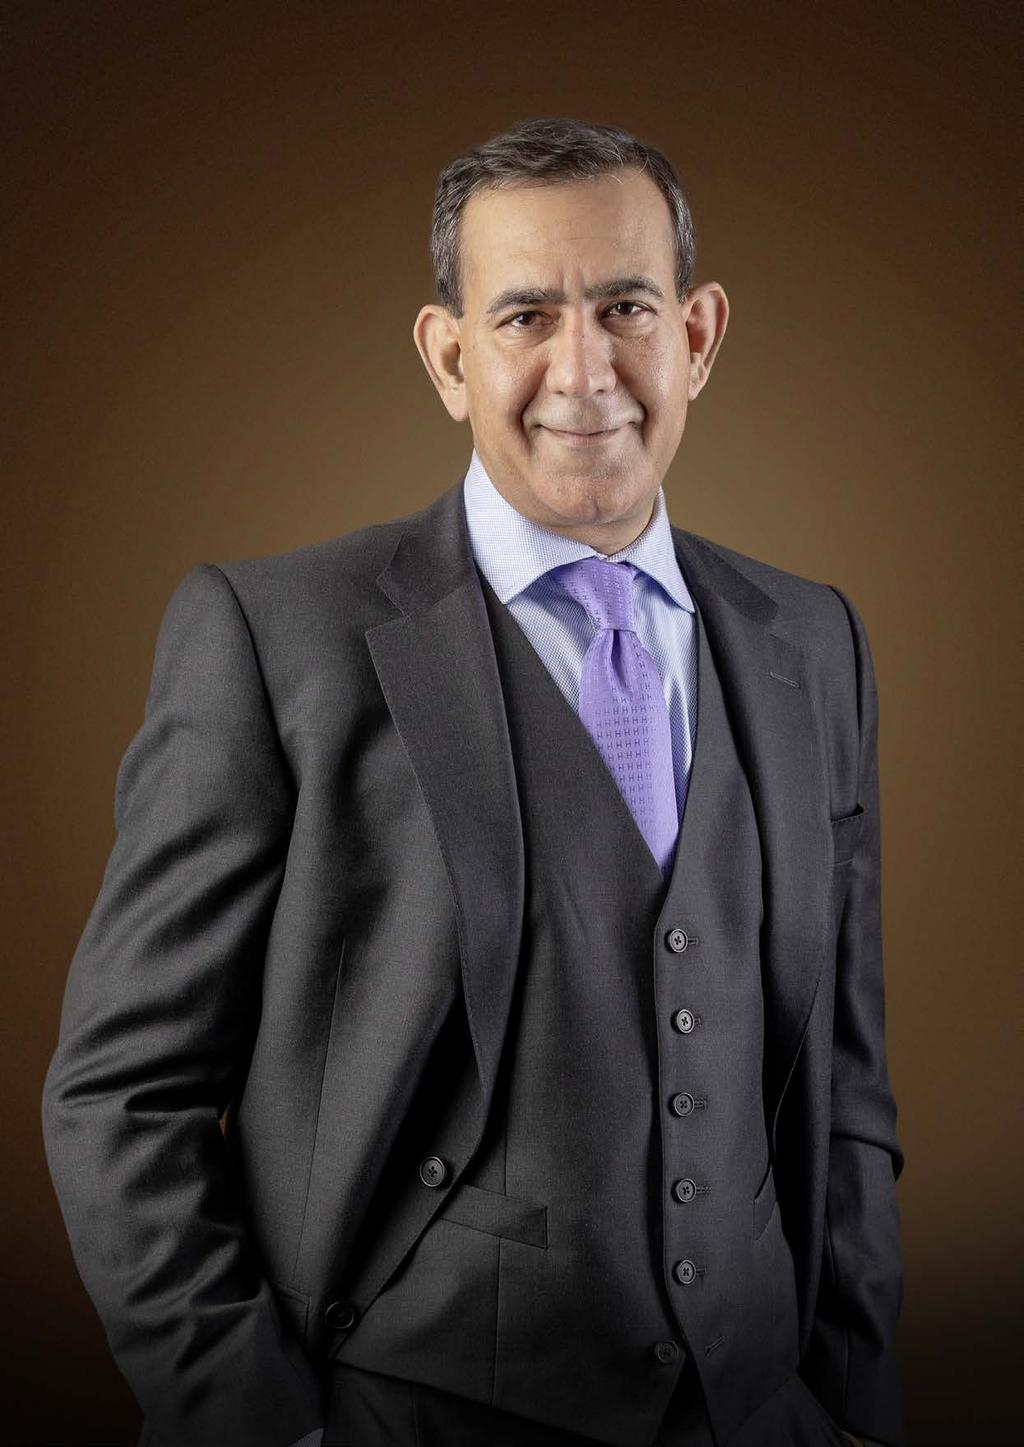 GET TO KNOW RAGHU MALHOTRA PRESIDENT-MIDDLE EAST AND AFRICA, MASTERCARD GLOBAL